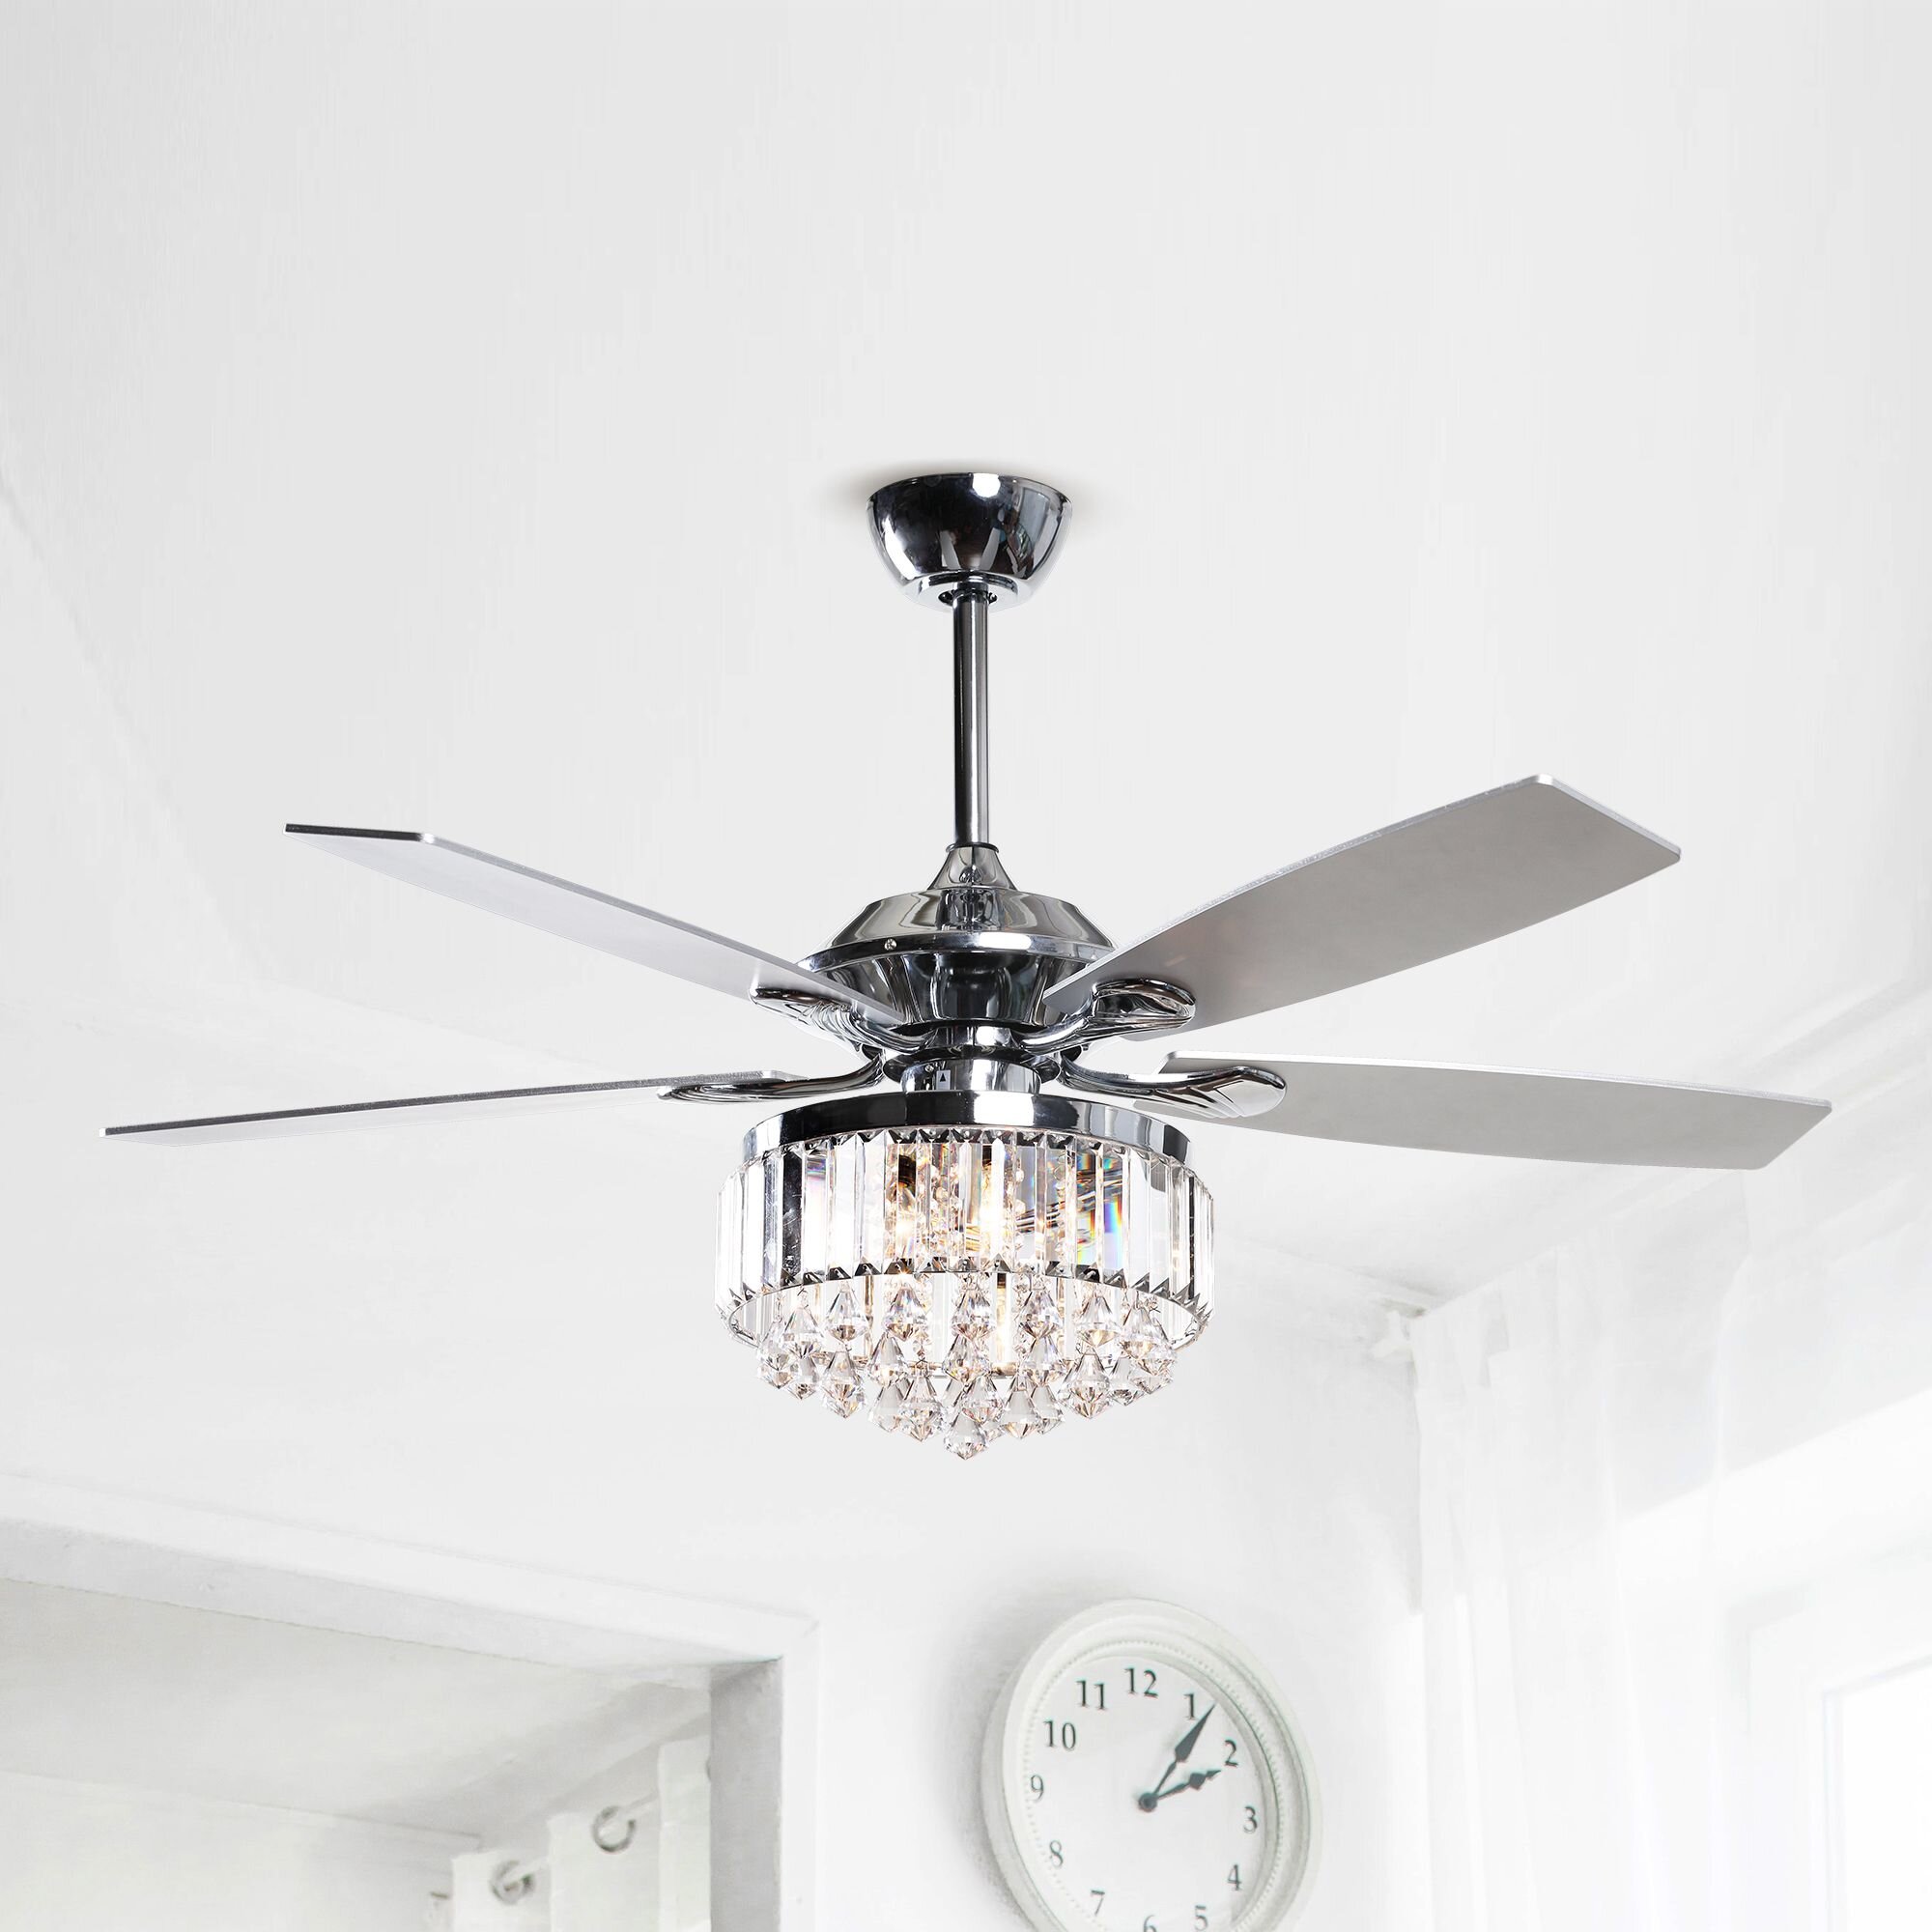 House Of Hampton 52 Estill 5 Blade Crystal Ceiling Fan With Remote Control And Light Kit Included Reviews Wayfair